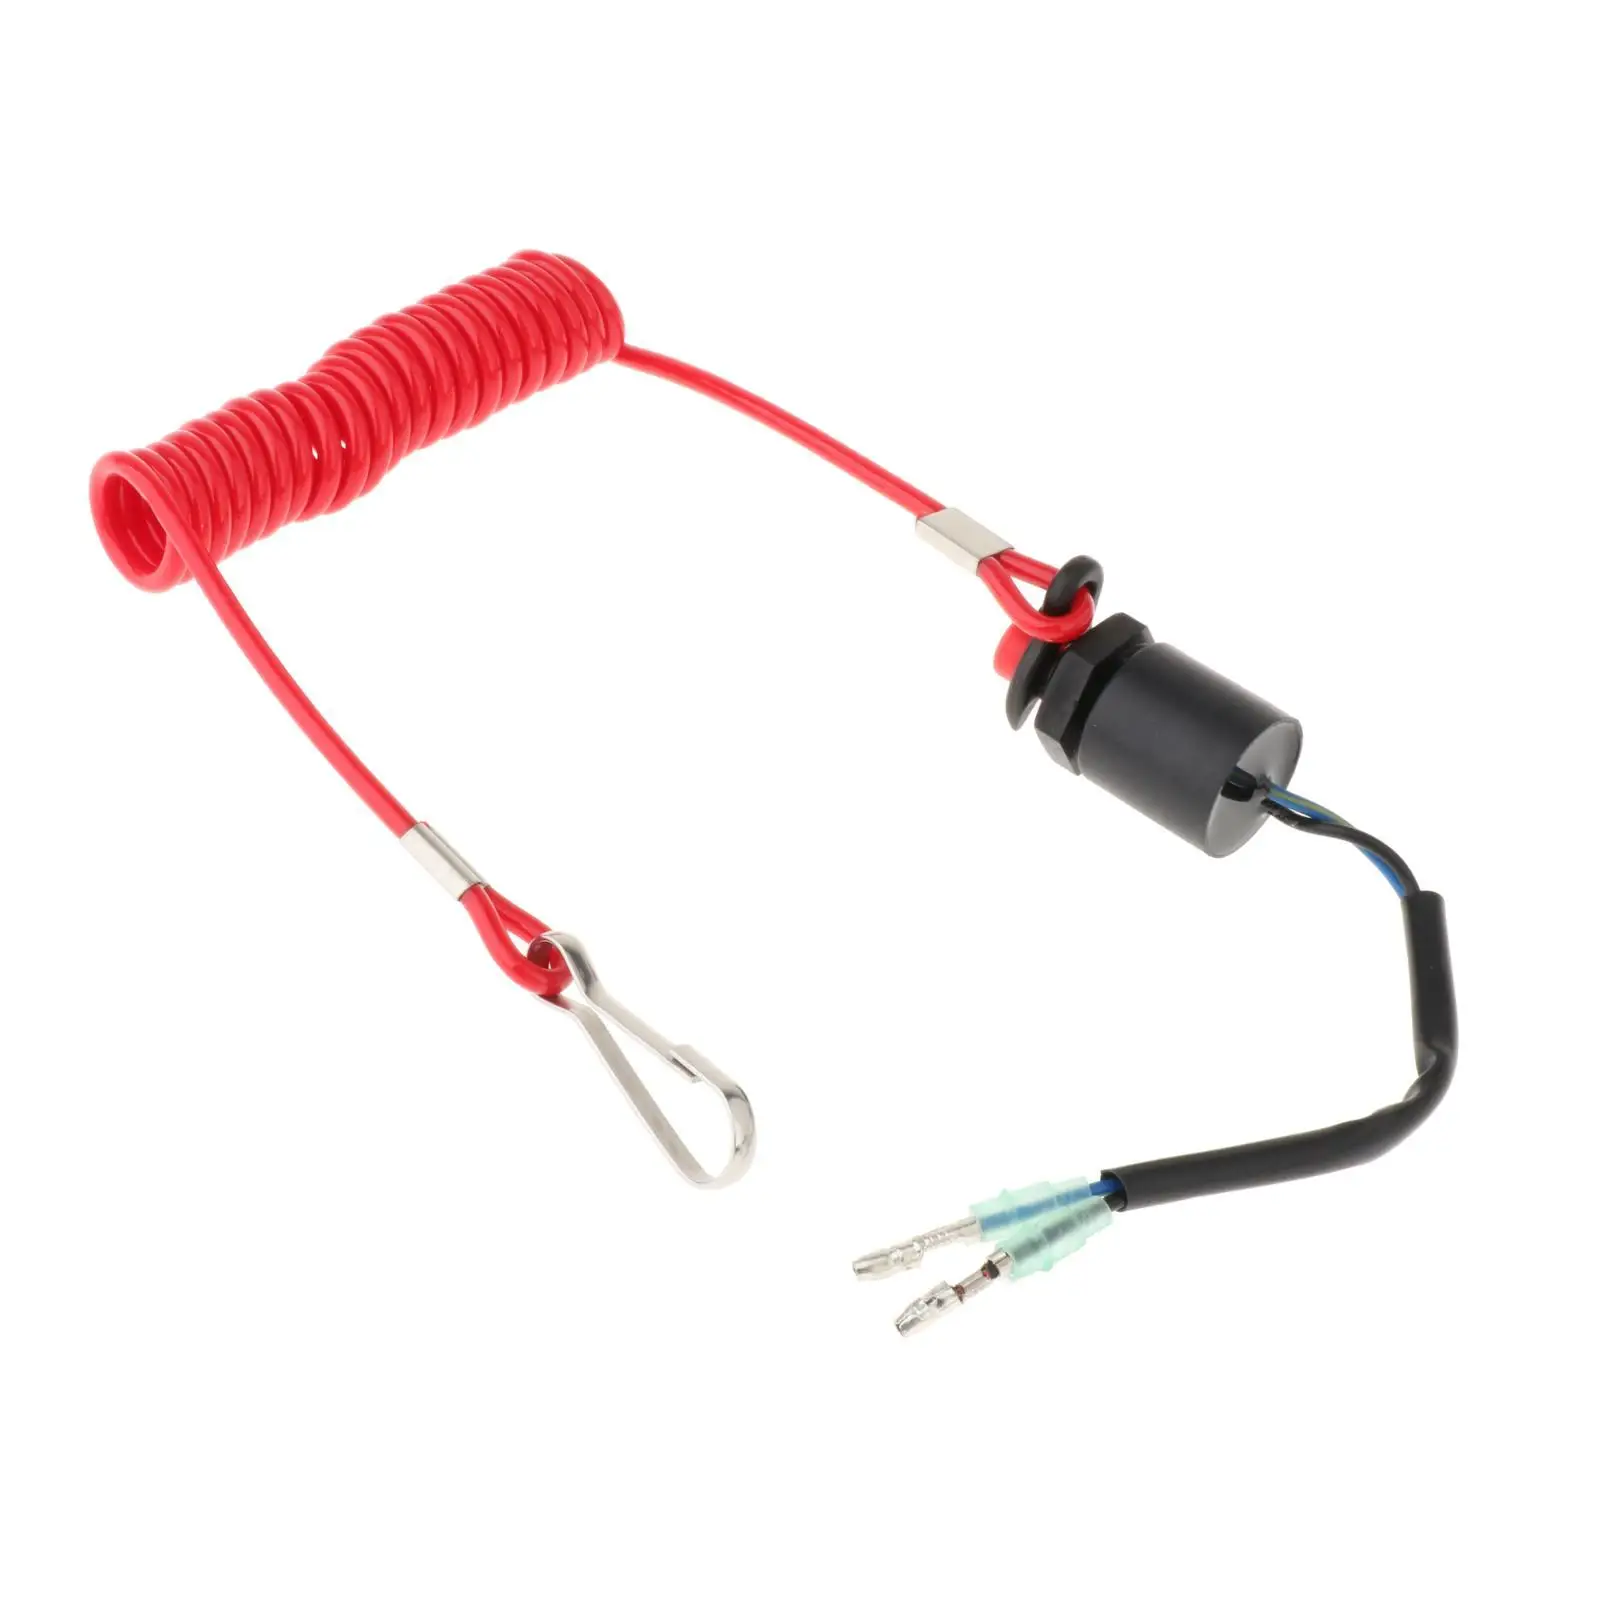 Boat Outboard Switch 37820-92E03 Stop Kill Safety Lanyard Boat Kill Switch with Lanyard for Suzuki DT DF 4HP-100HP